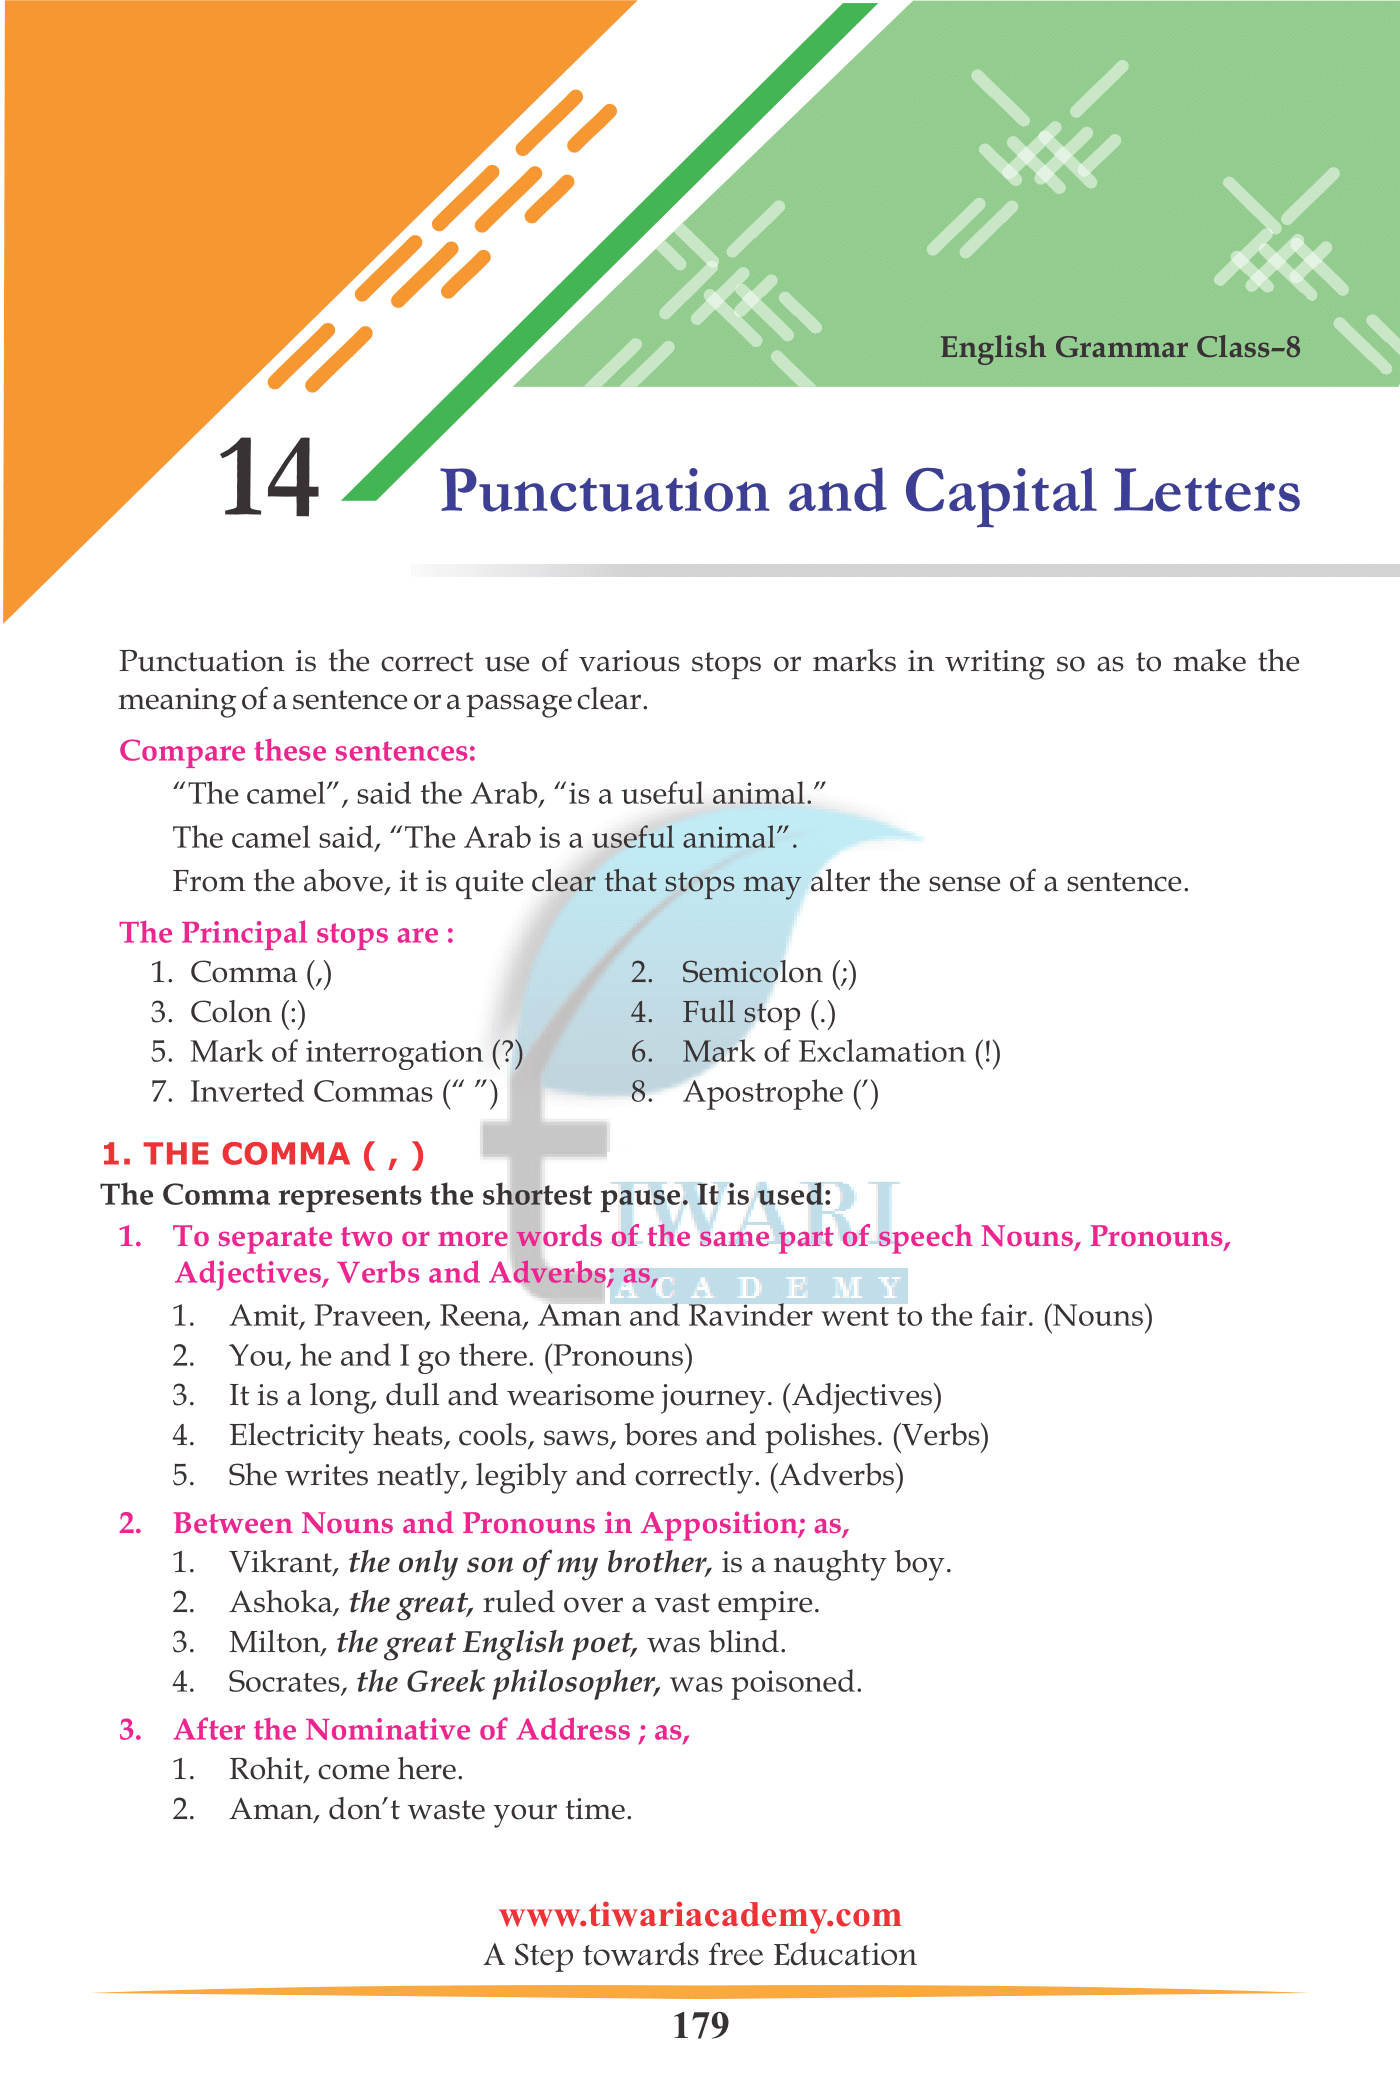 Class 8 English Grammar Chapter 14 Punctuation and Capital Letters 2022-2023